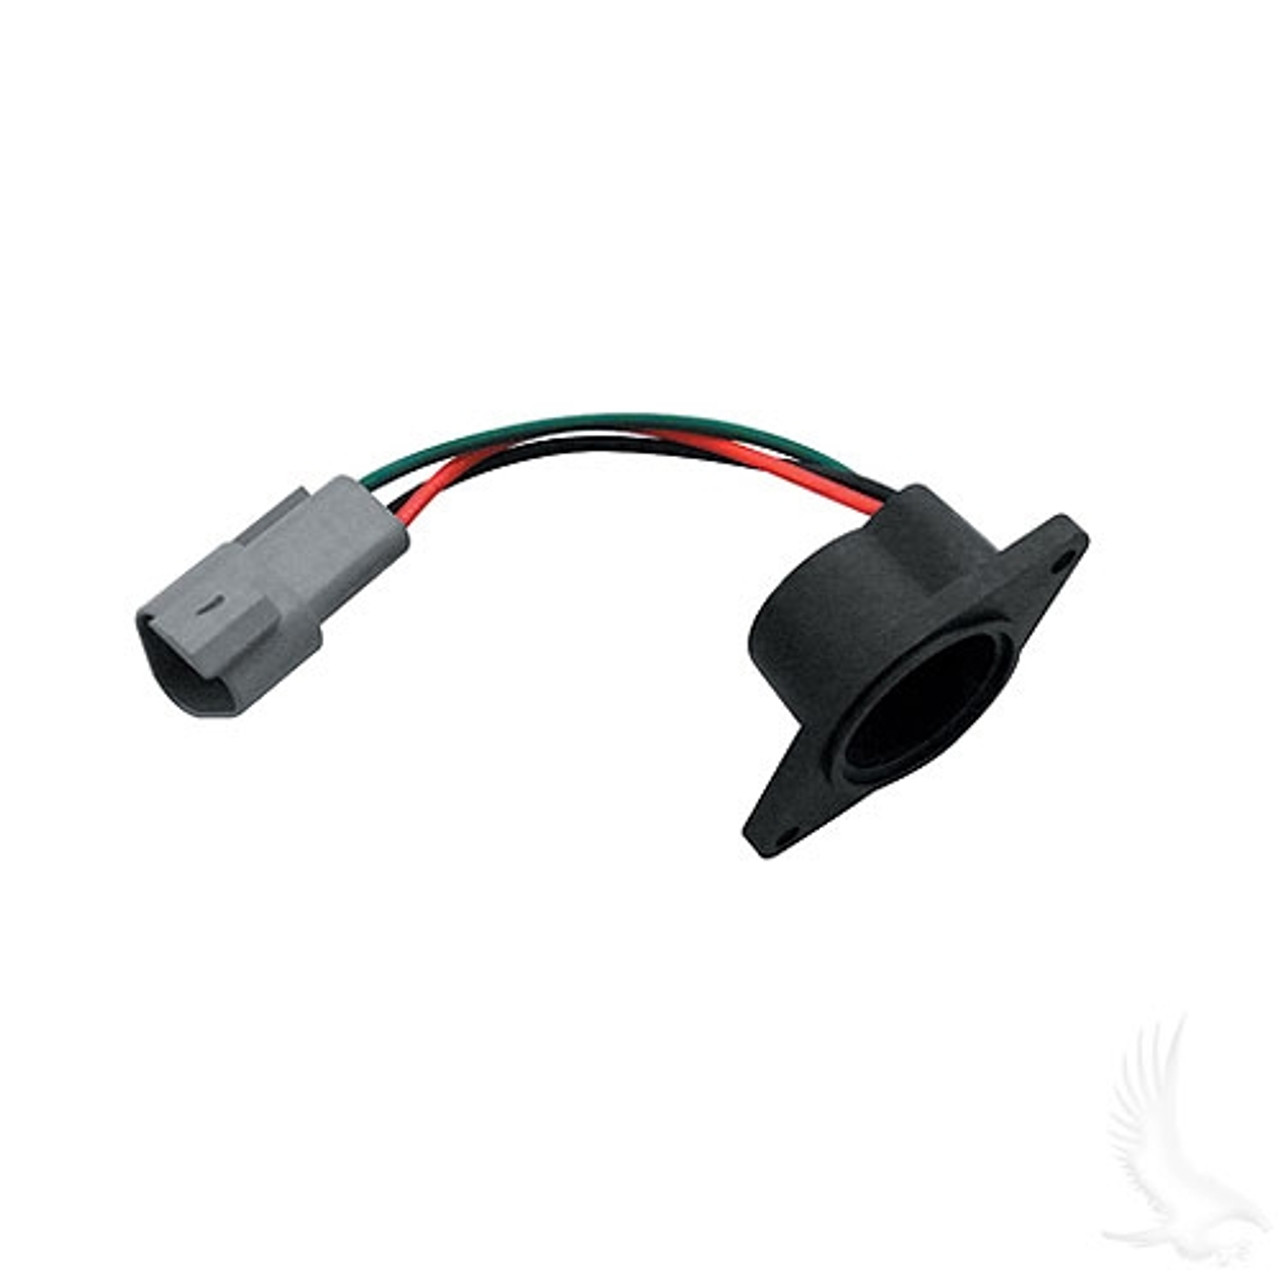 SPEED SENSOR FOR CLUB CAR IQ. ADC MOTOR, NEW STYLE